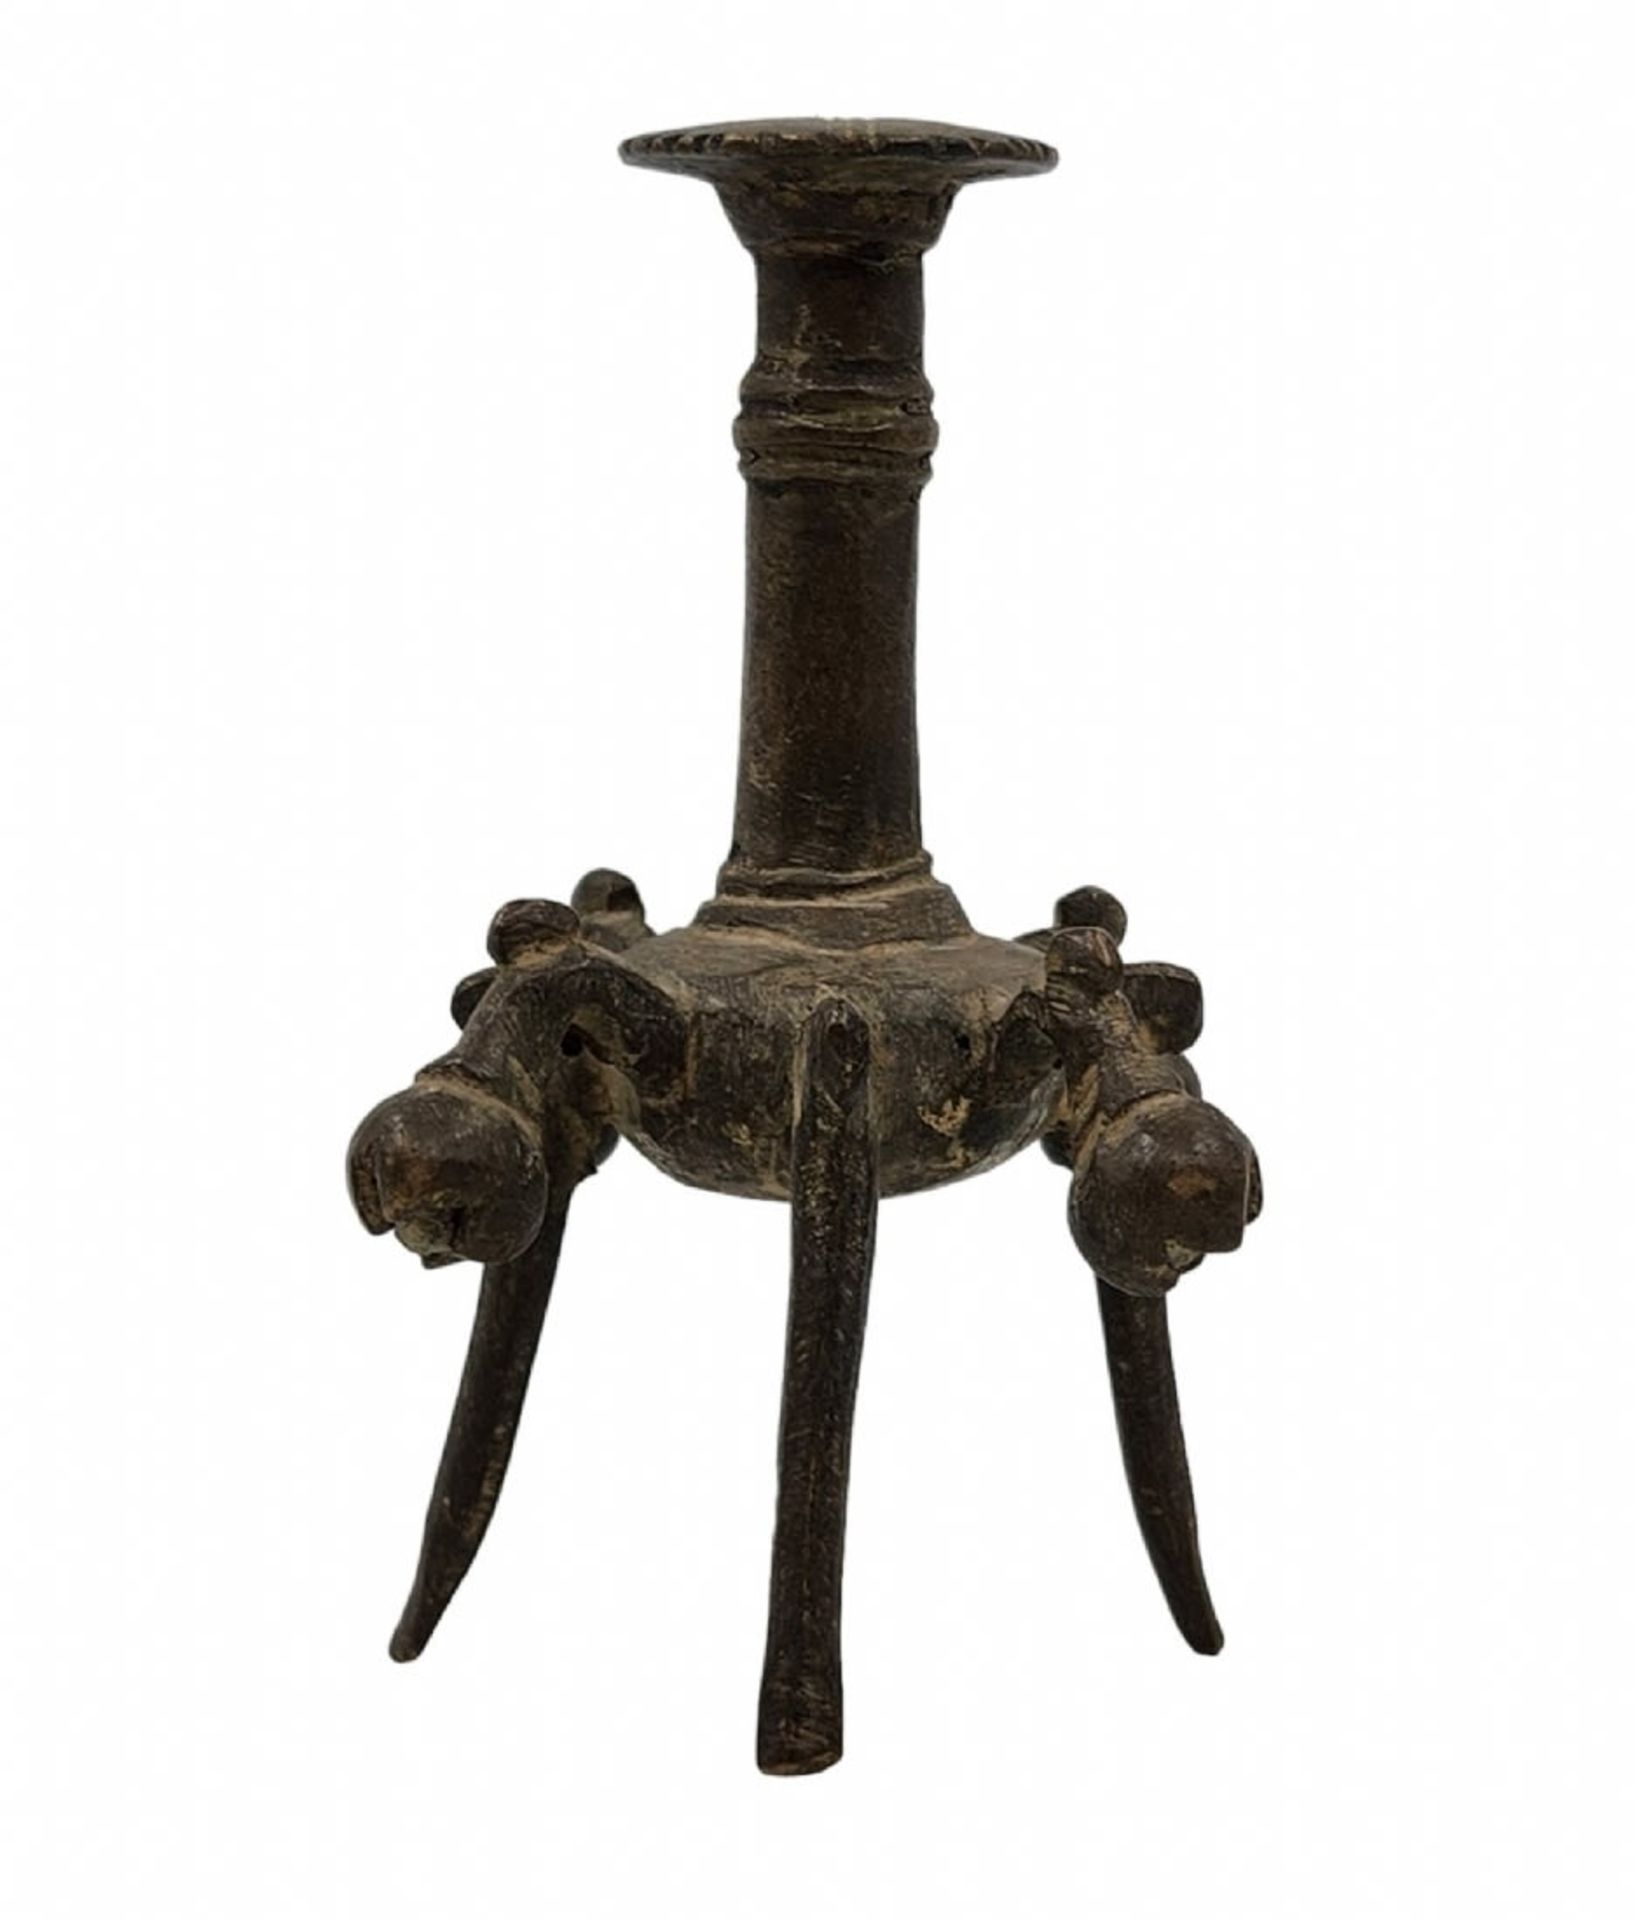 An antique Indian vessel for cosmetics, made of bronze, 18th century, Height: 16 cm, Width: 11 cm. - Image 3 of 4